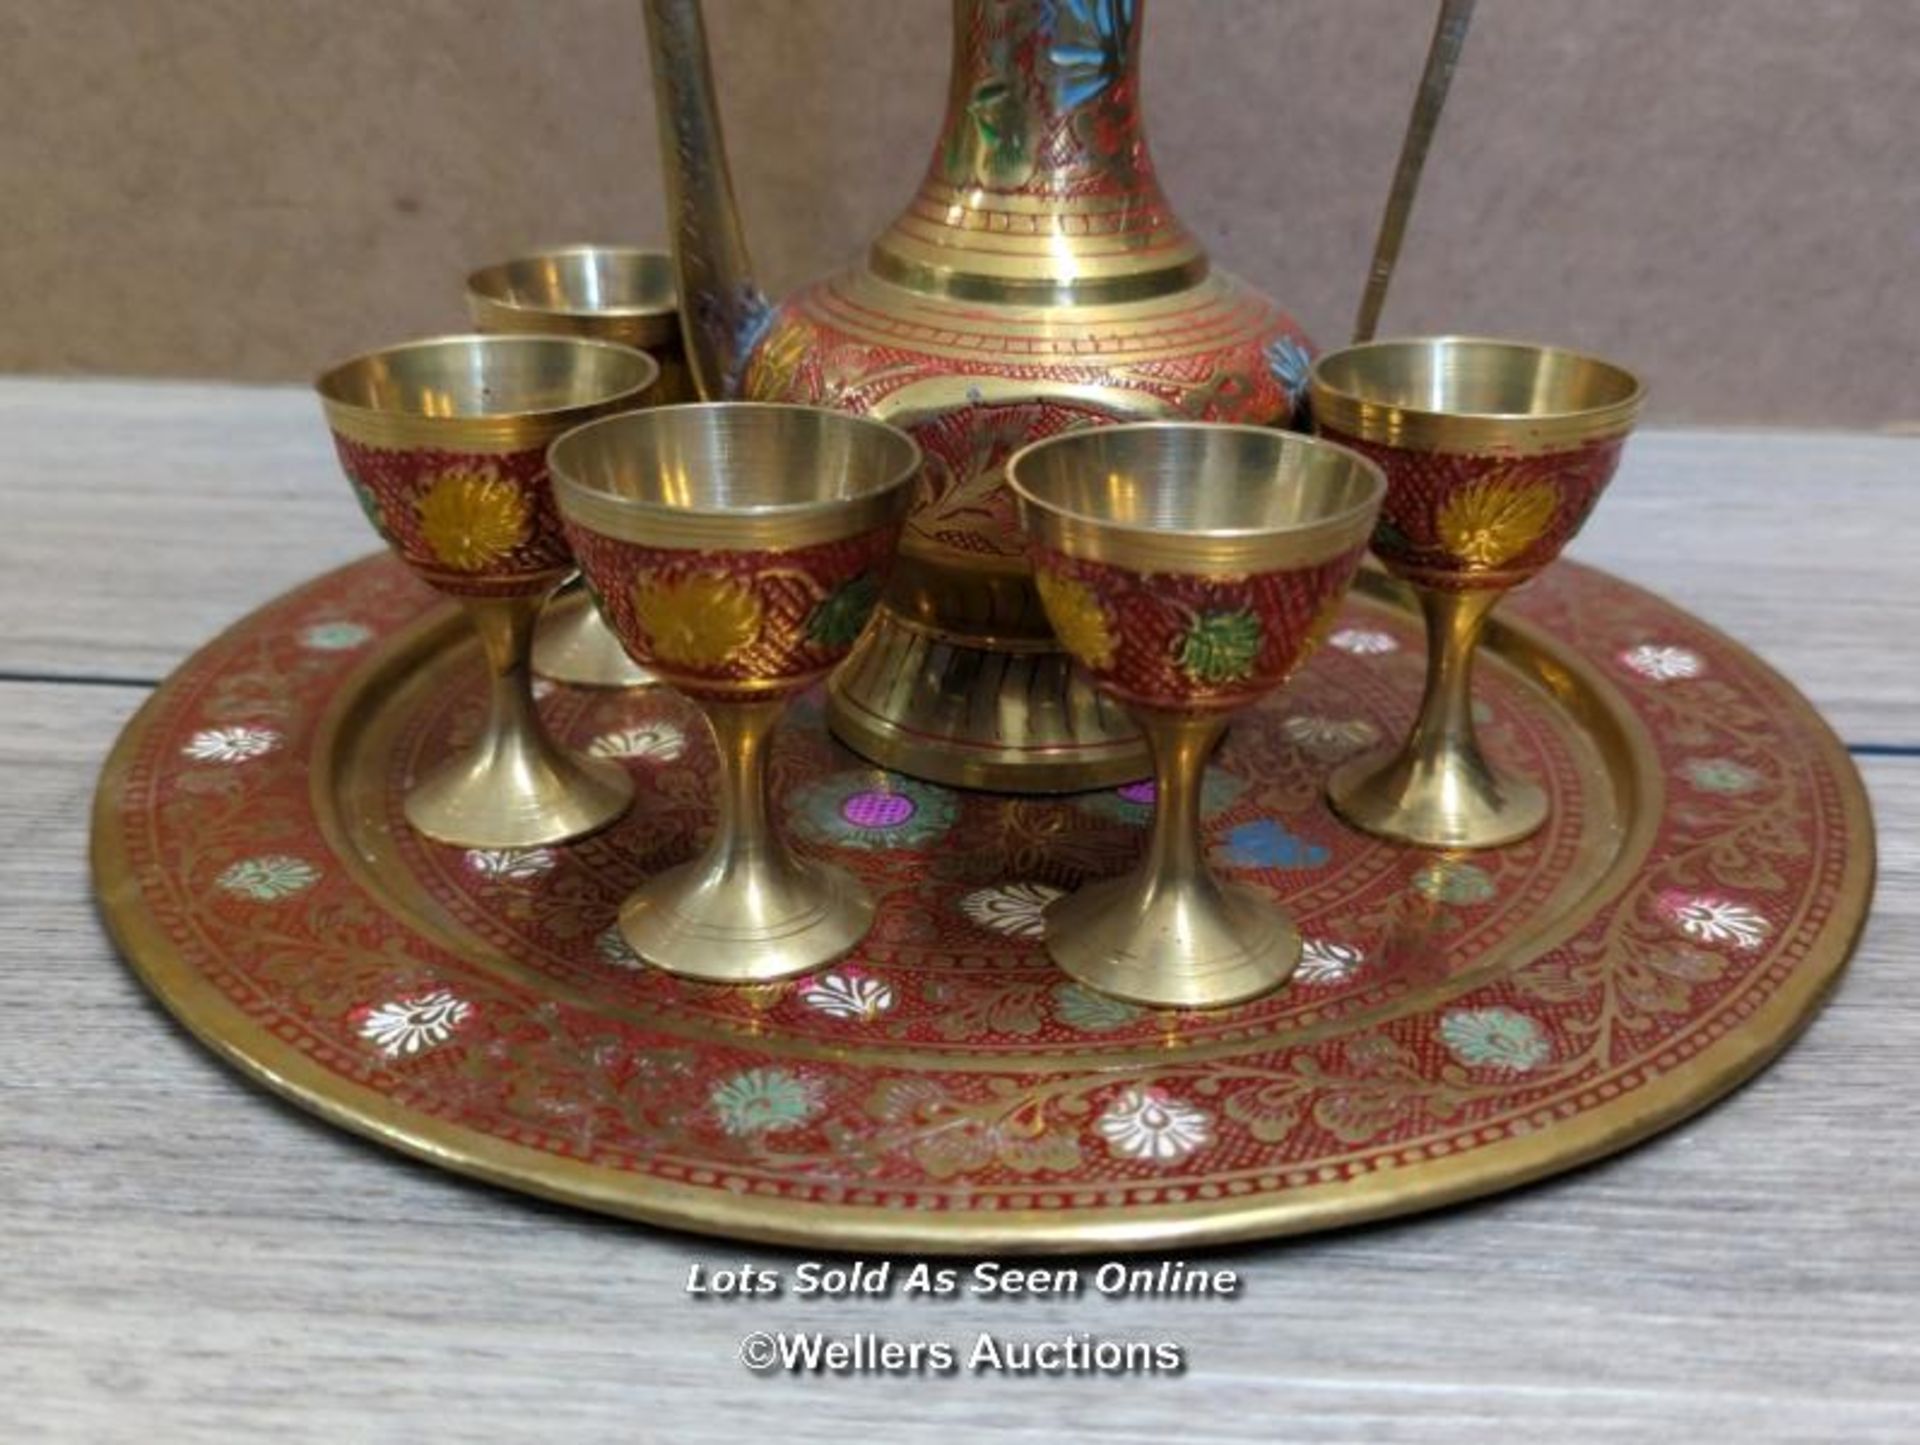 DECORATIVE MIDDLE EASTERN COFFEE SET - Image 2 of 6